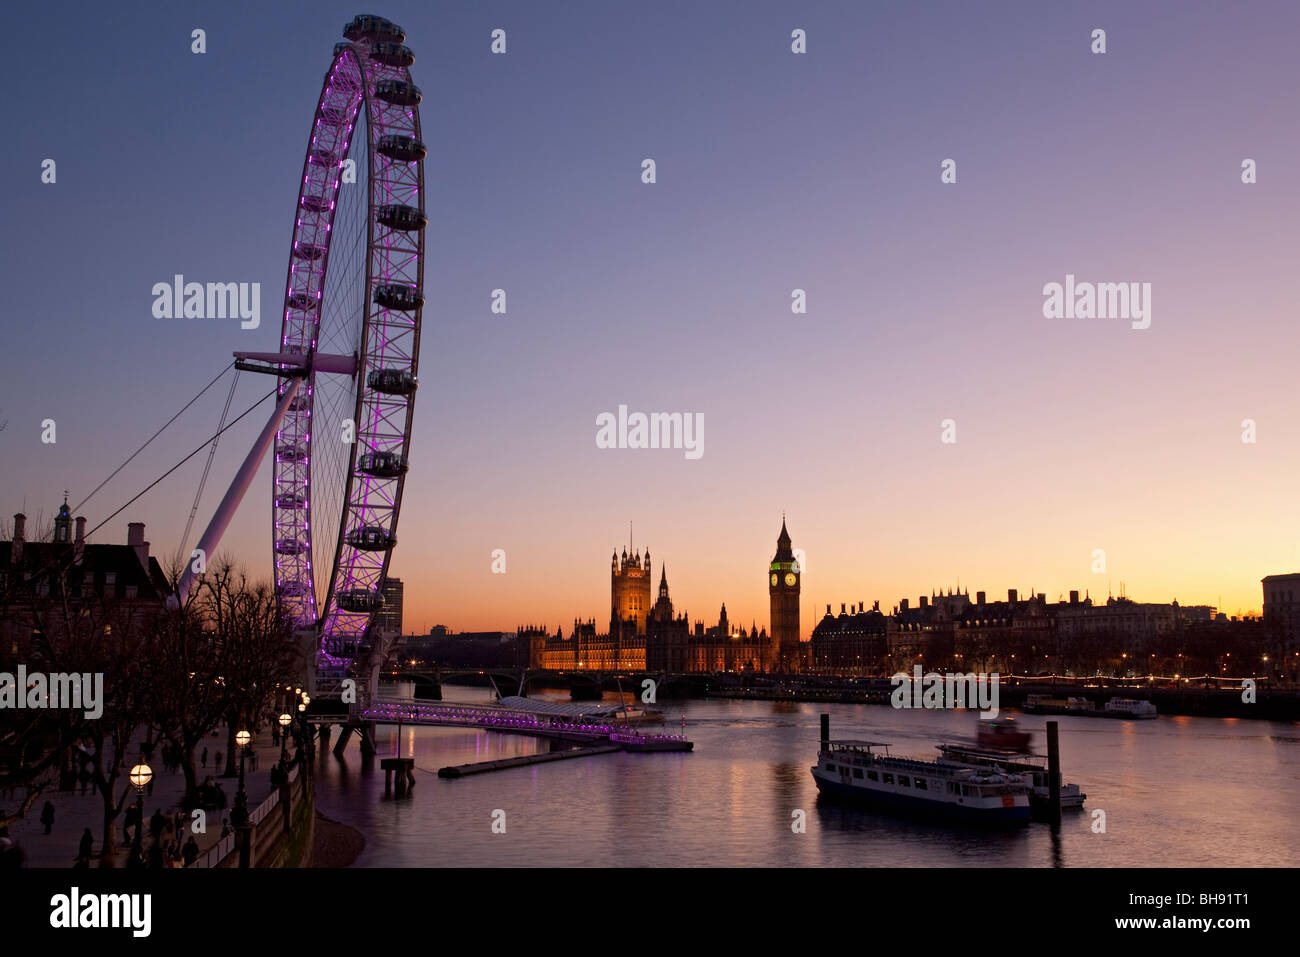 Millennium Wheel, River Thames Big Ben and the houses of parliament at night from the south bank, London, England, Europe Stock Photo